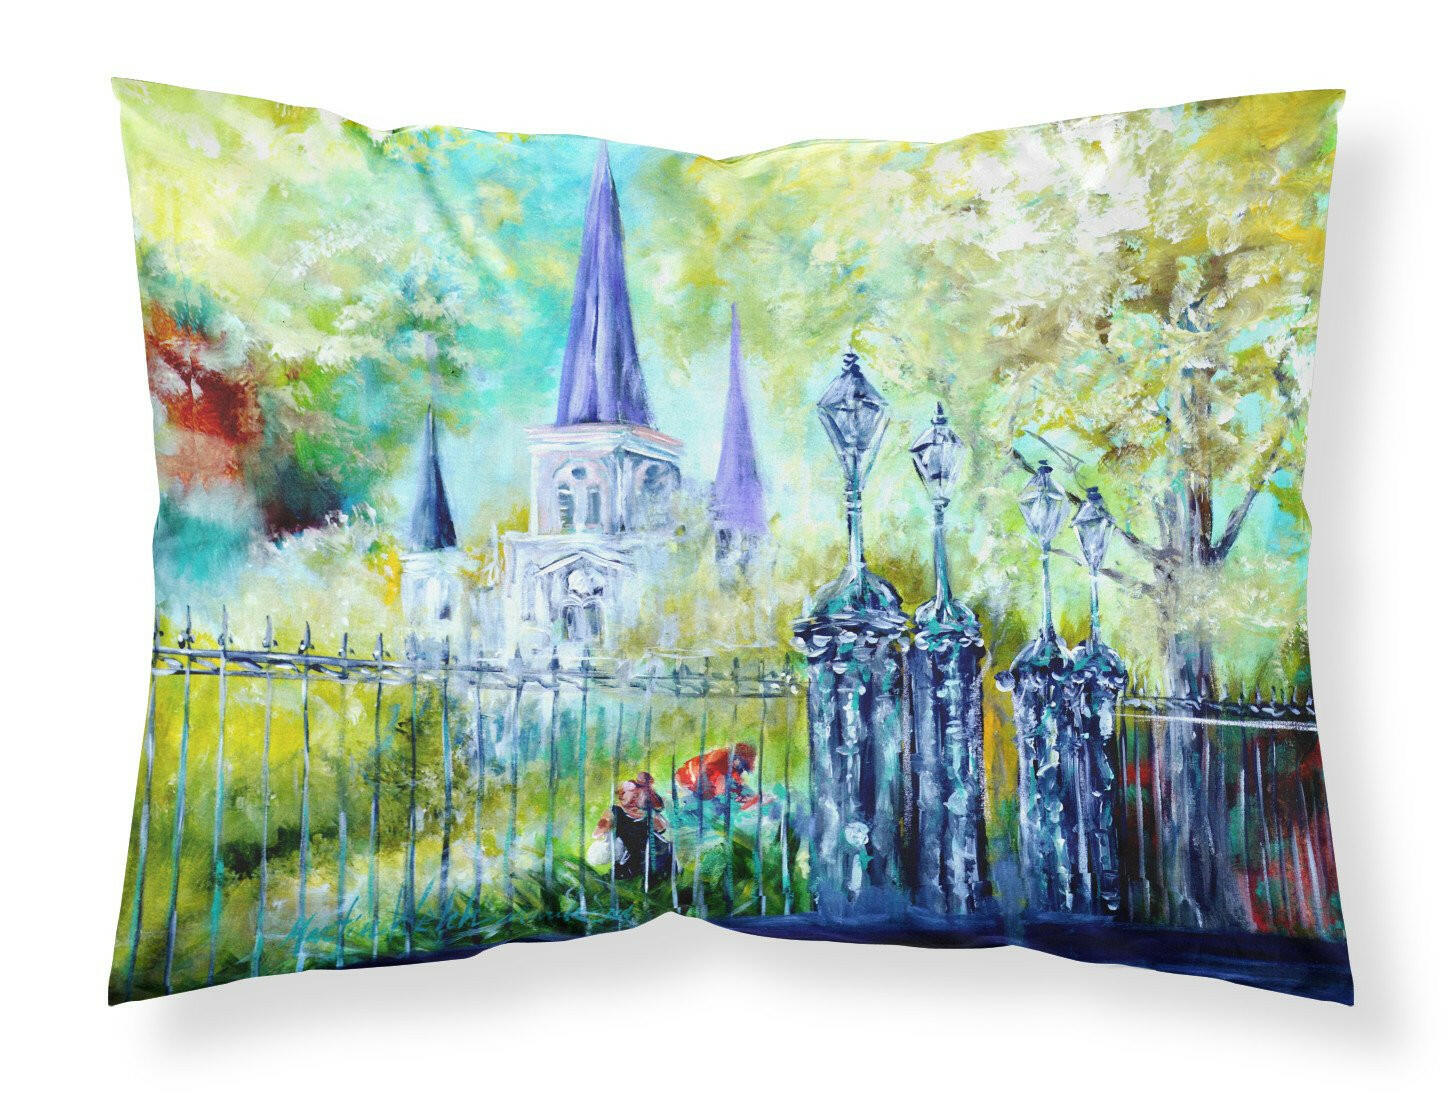 St Louis Cathedrial Across the Square Fabric Standard Pillowcase MW1217PILLOWCASE by Caroline's Treasures